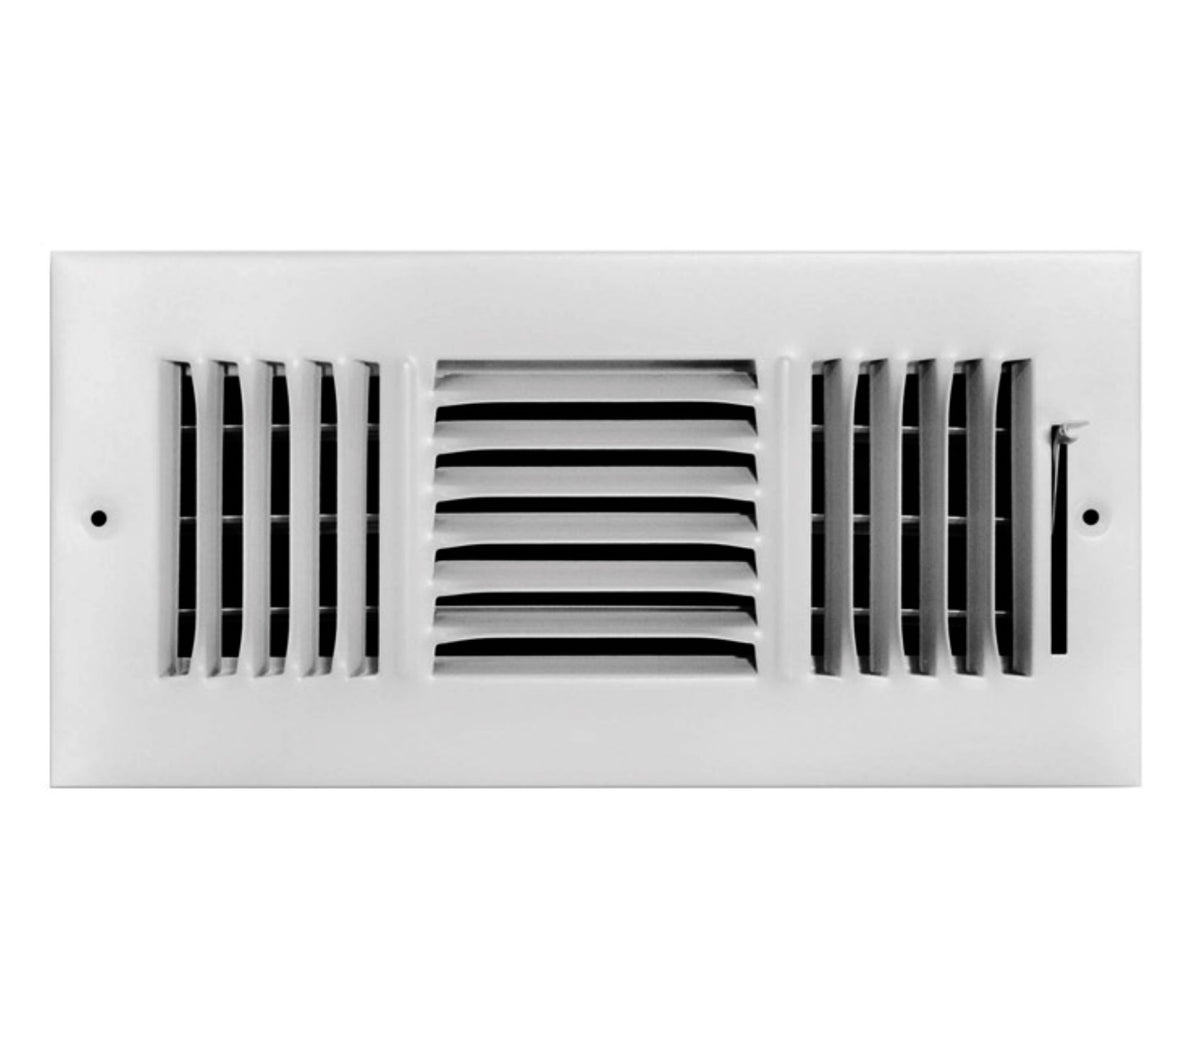 buy wall registers at cheap rate in bulk. wholesale & retail heat & cooling parts & supplies store.